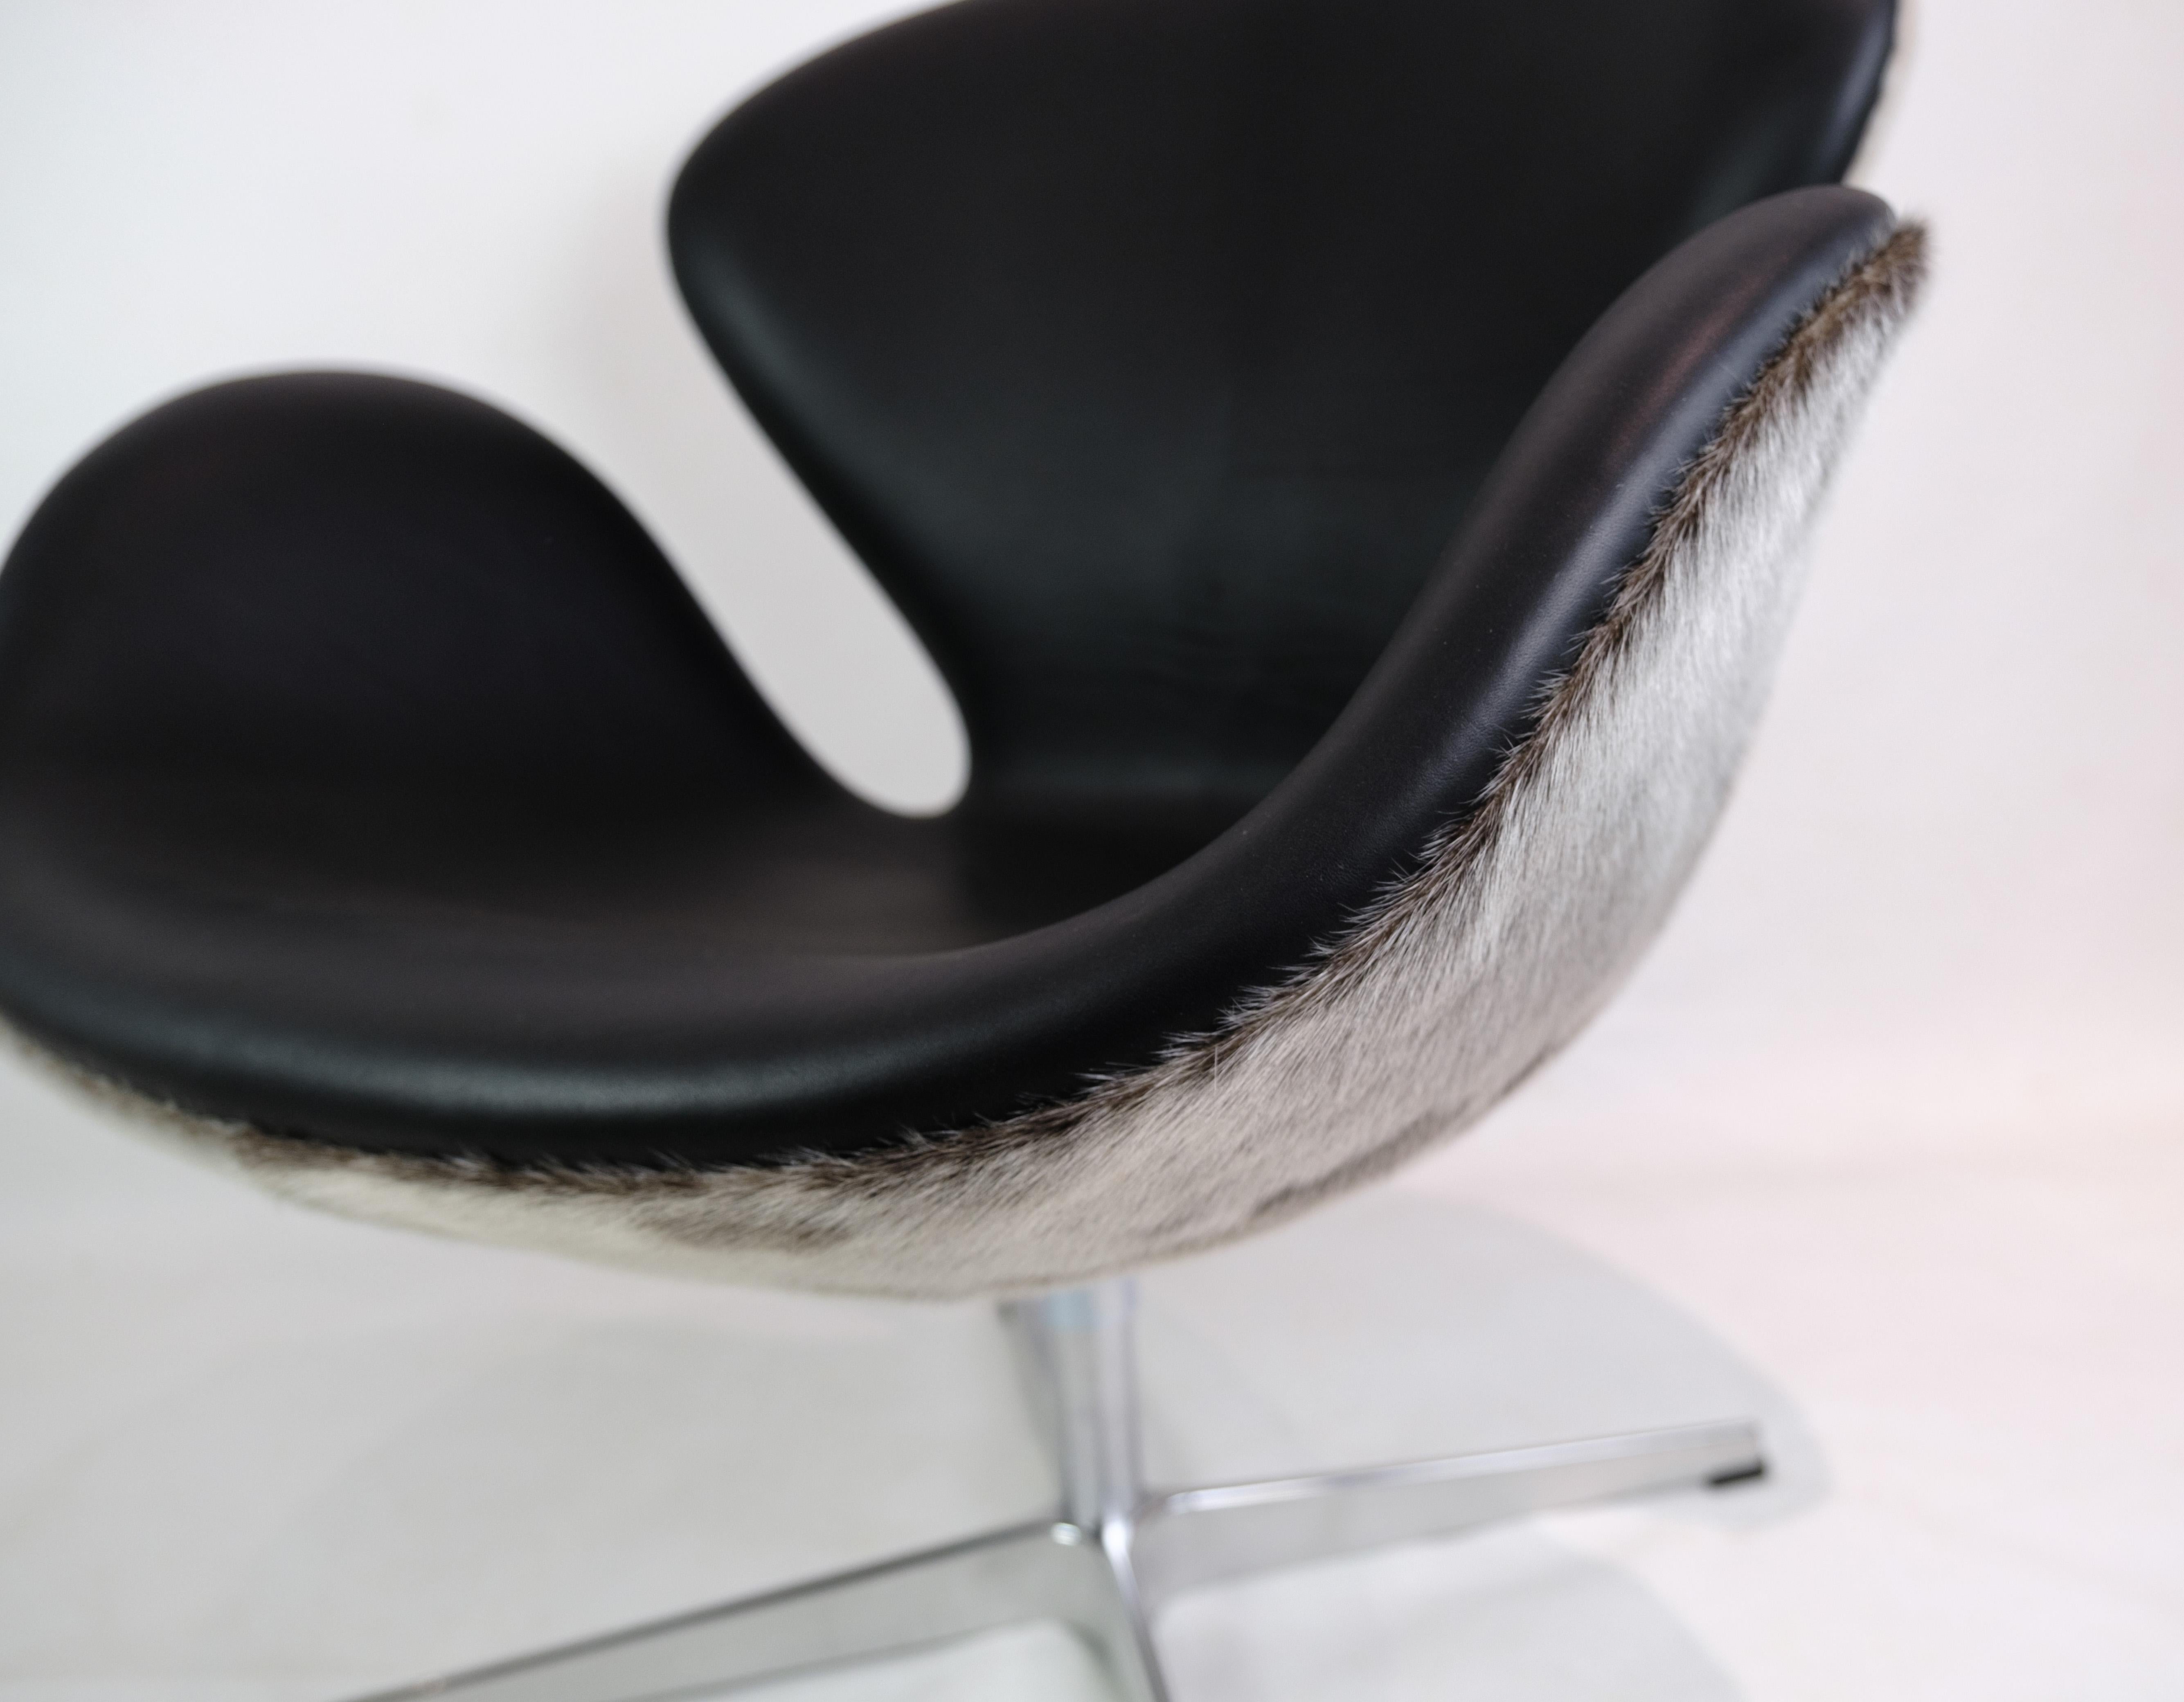 Swan chair Model 3320 Designed By Arne Jacobsen Made By Fritz Hansen From 1958s In Good Condition For Sale In Lejre, DK